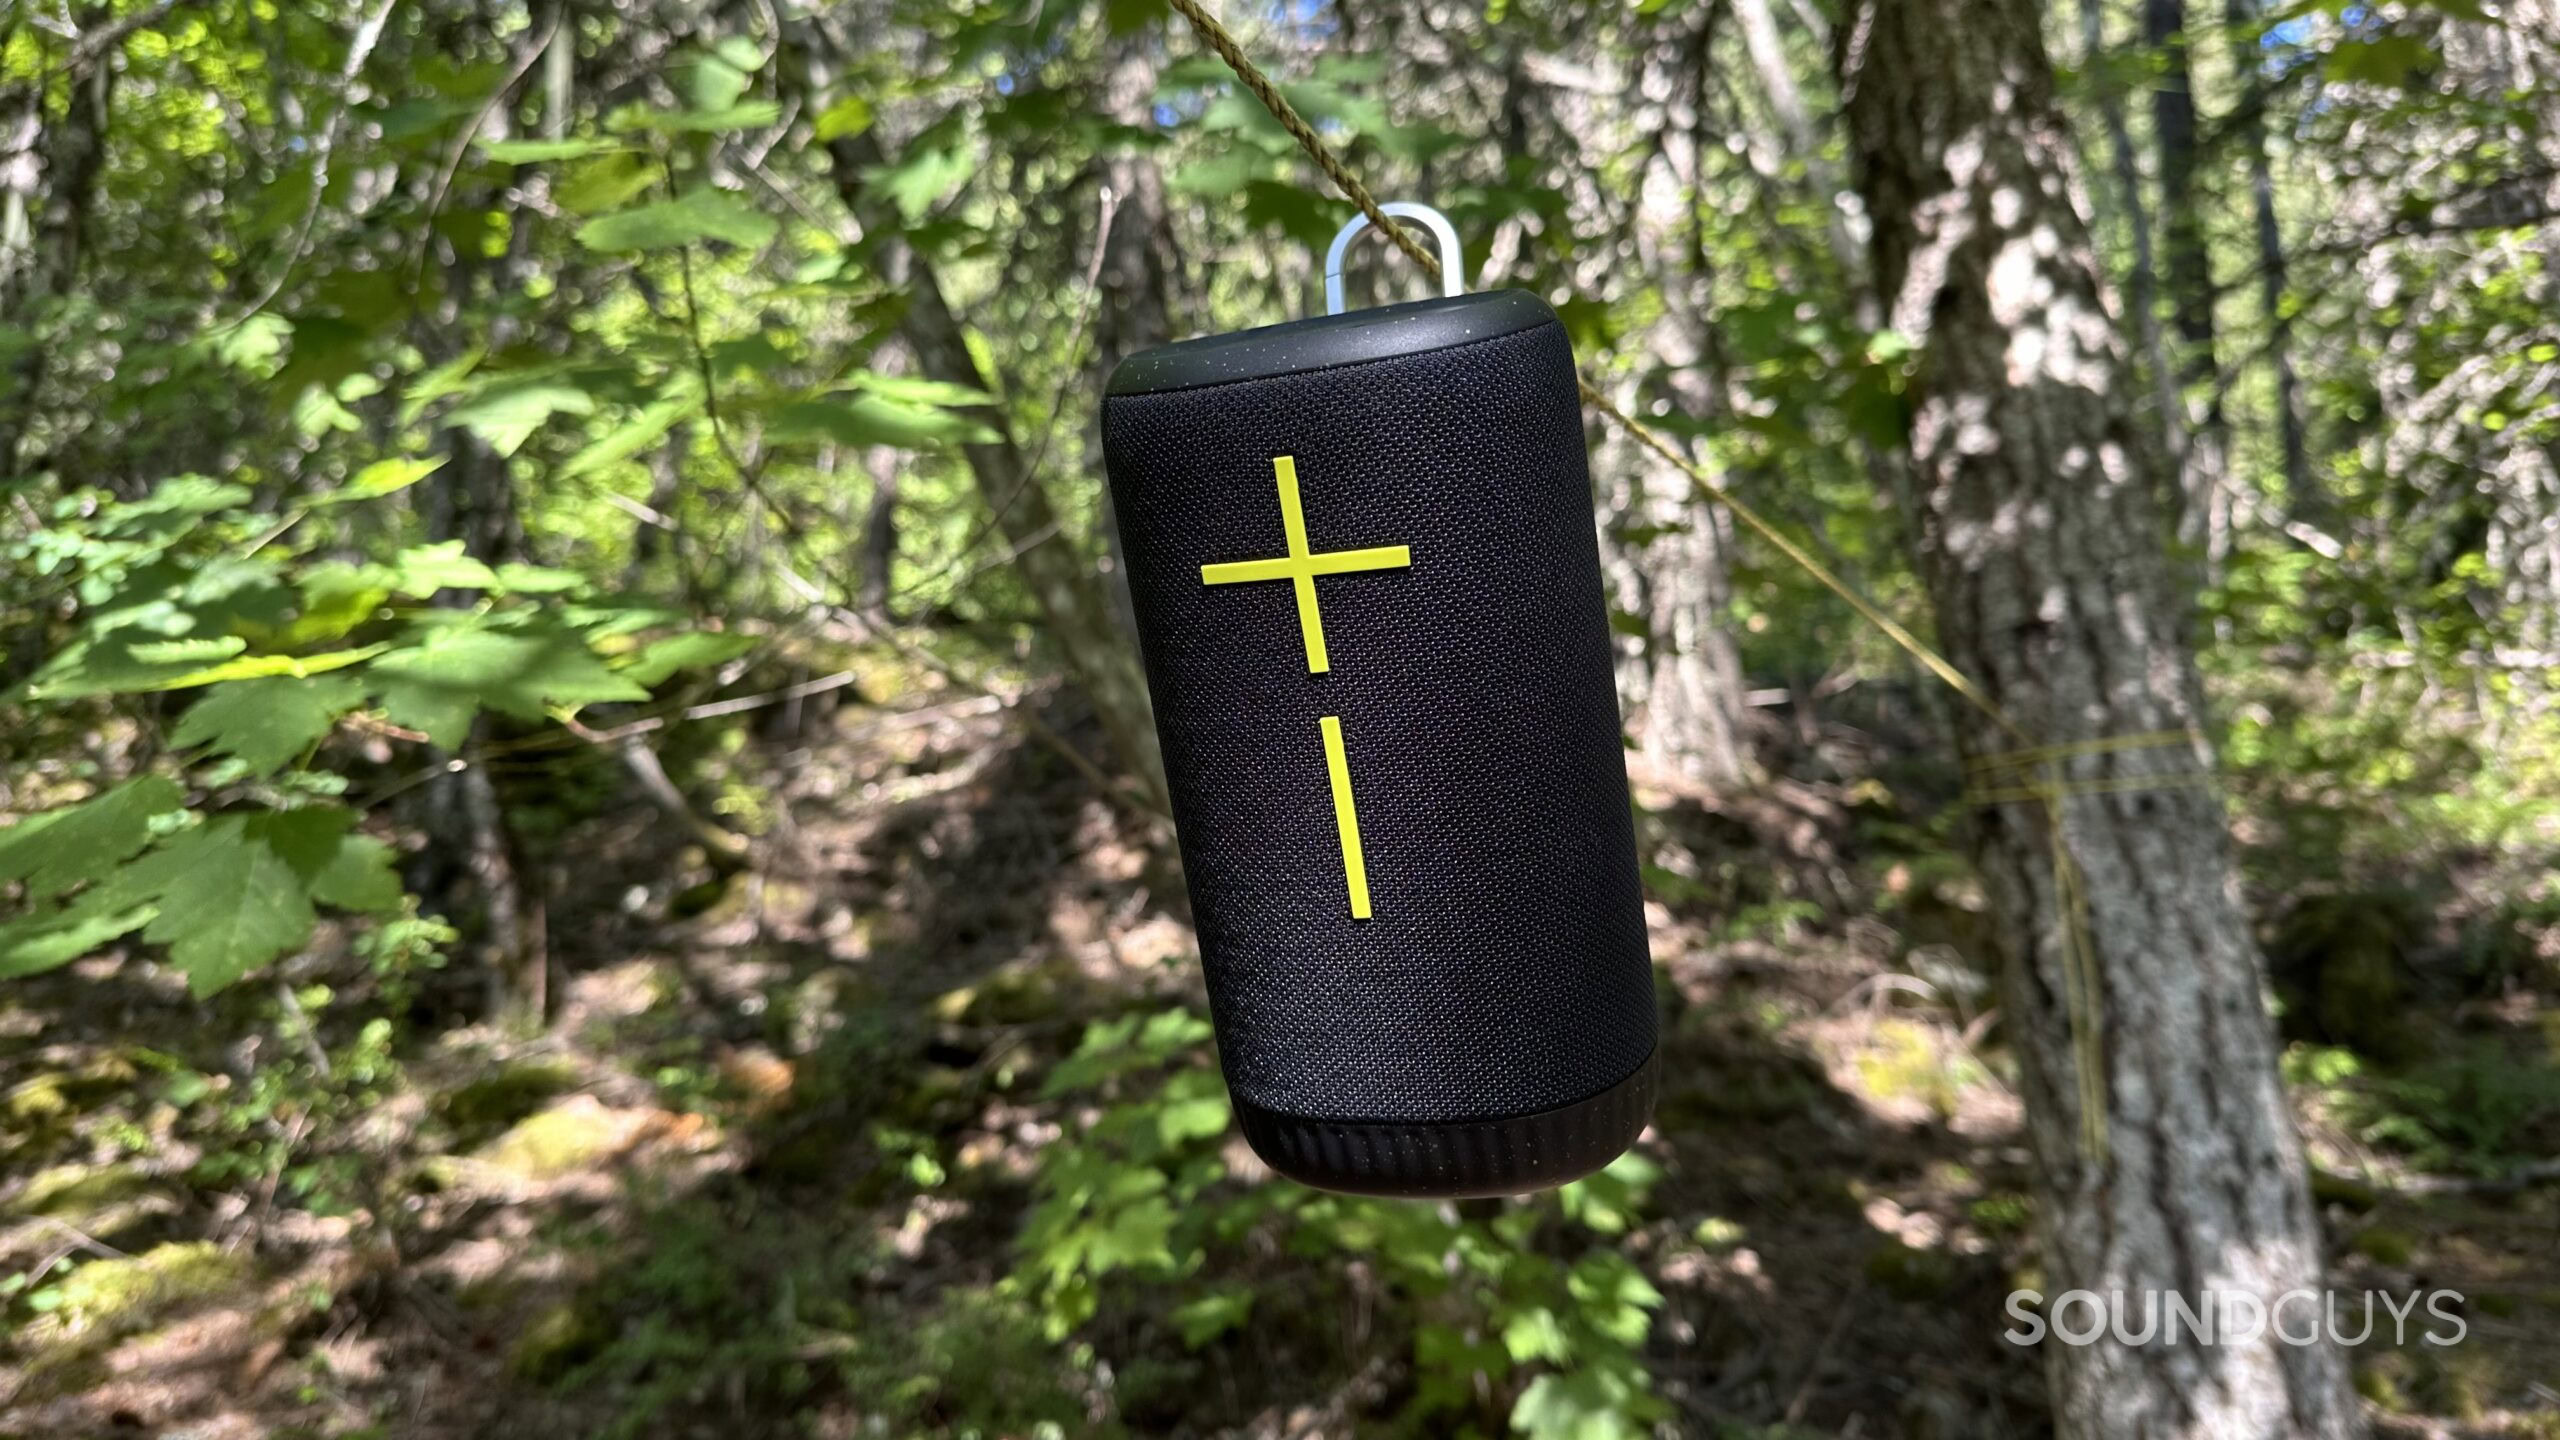 A Ultimate Ears Everboom boom speaker clipped to a rope in a forest.